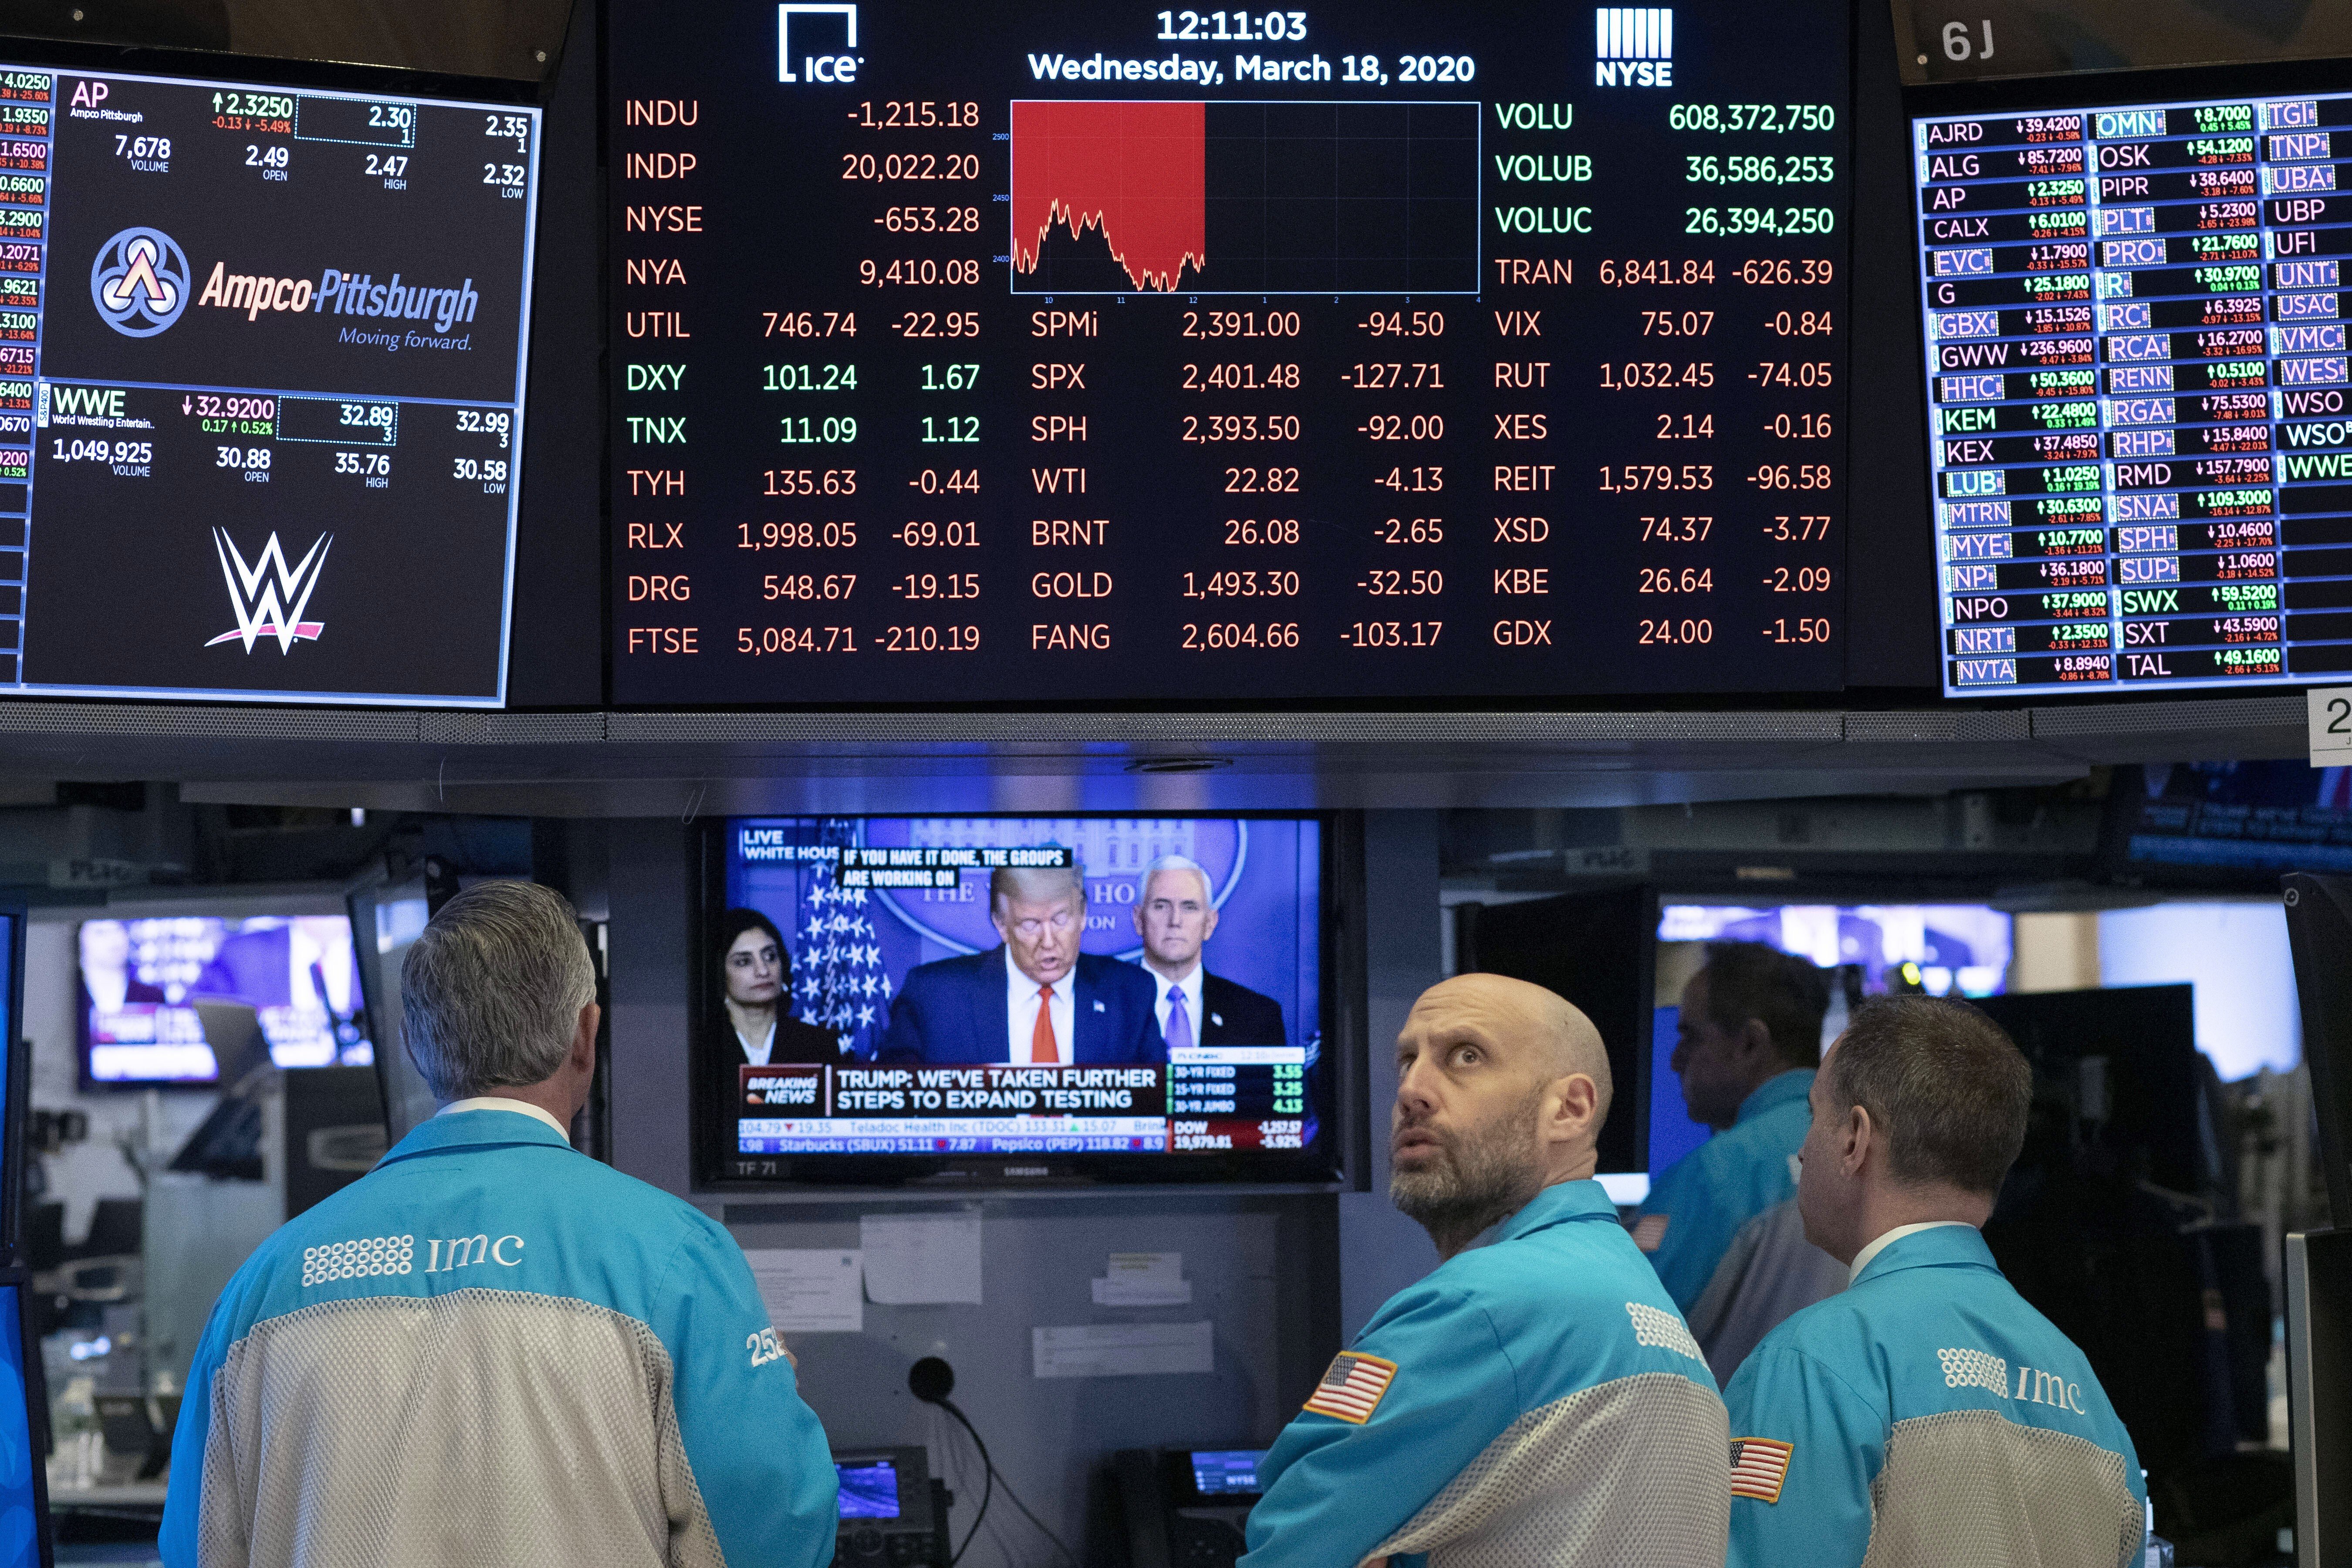 Traders at the New York Stock Exchange watch President Donald Trump’s televised White House news conference on March 18. New US regulations may force several Chinese firms to delist from the American exchanges, resulting in these companies turning to Hong Kong and Shanghai to raise capital, in listings underwritten by US investment banks. Photo: AP